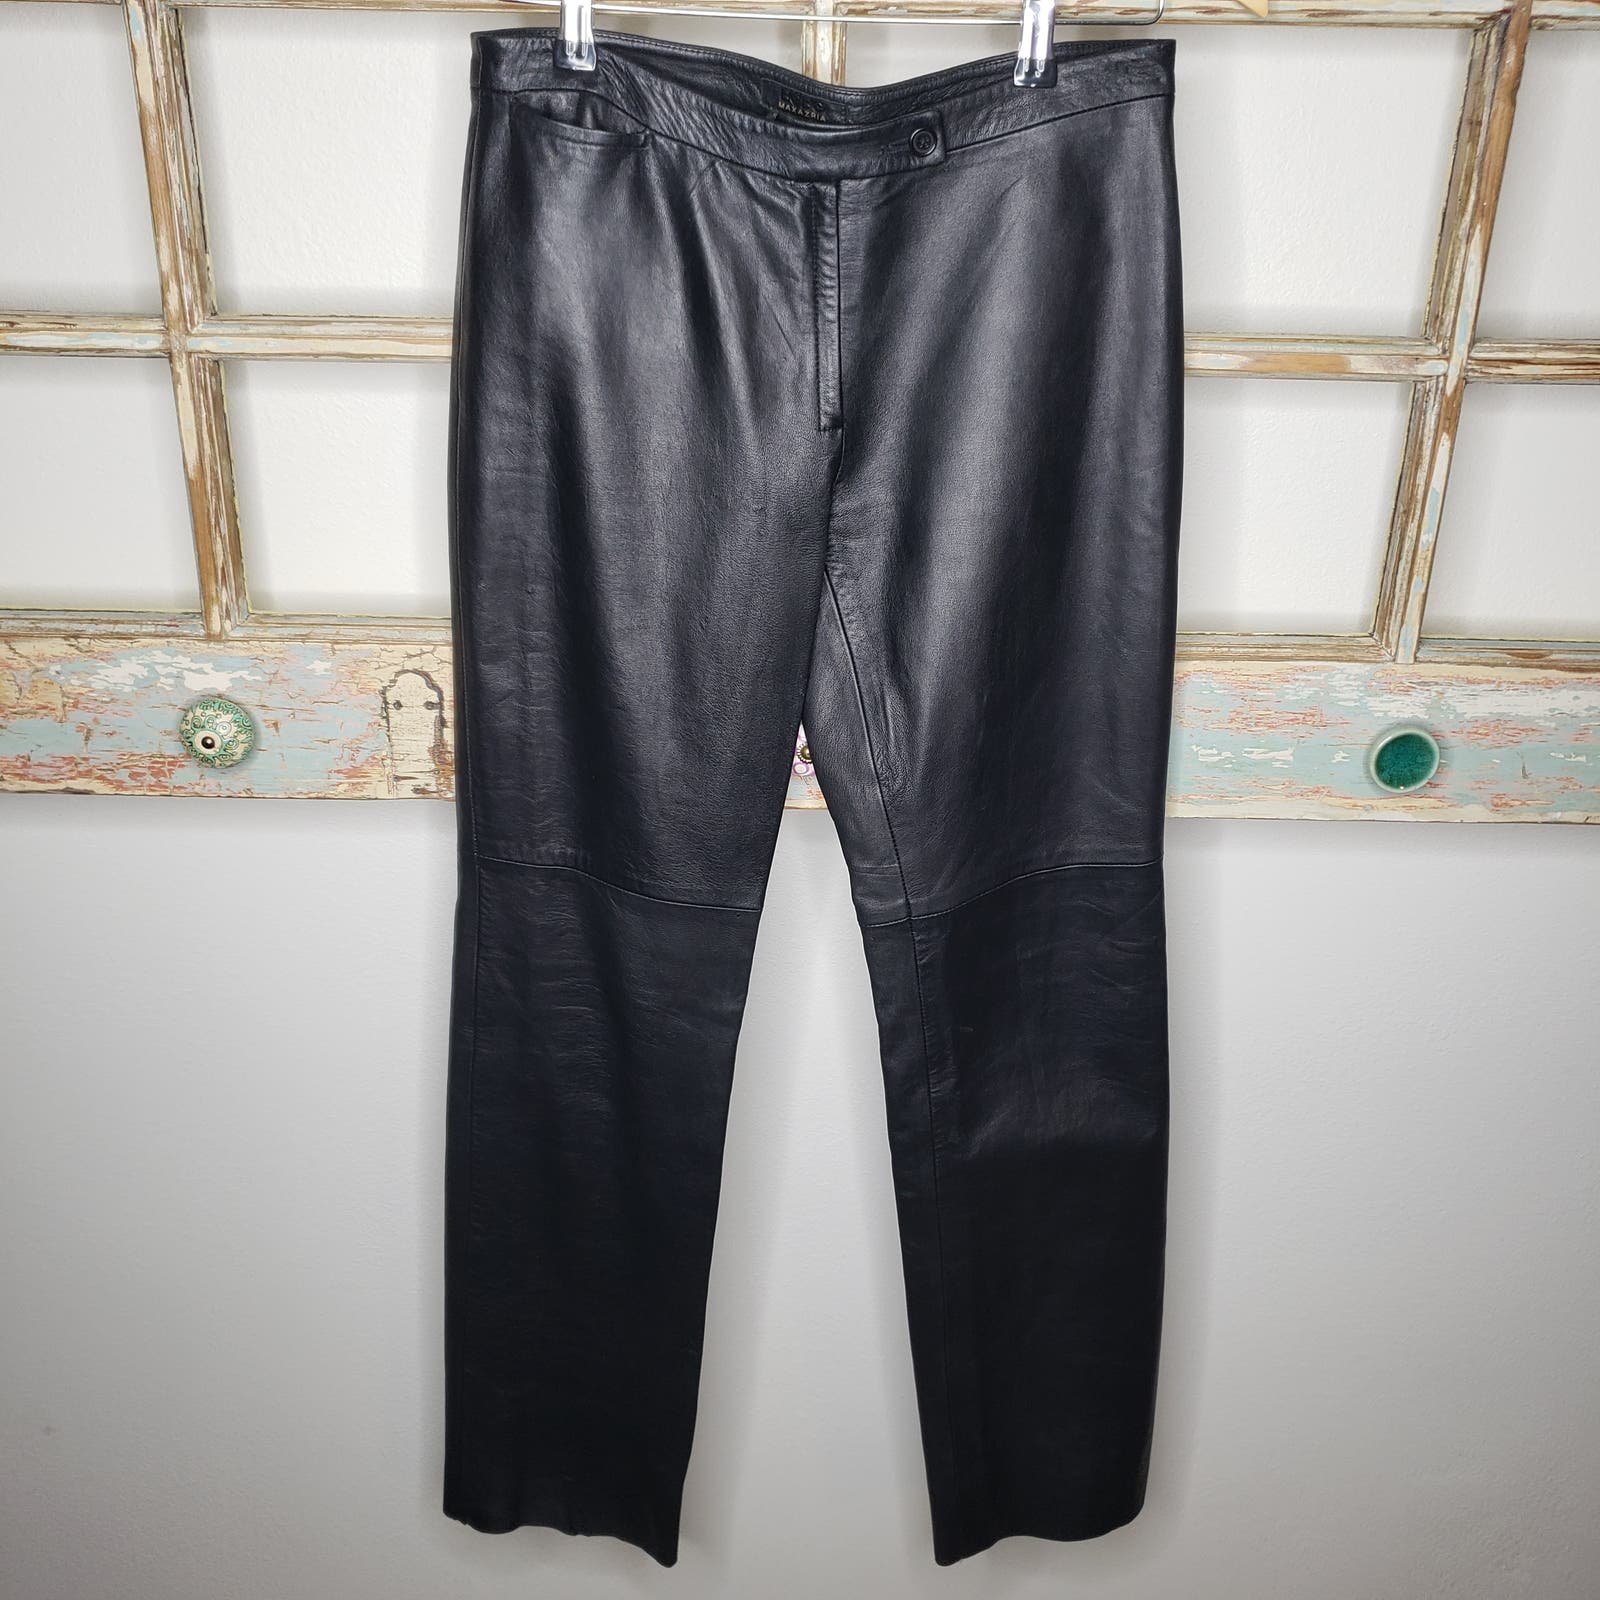 large discount BCBG MAXAZRIA 100% LEATHER PANTS LADIES SIZE 4 kJCF4n5aN for sale